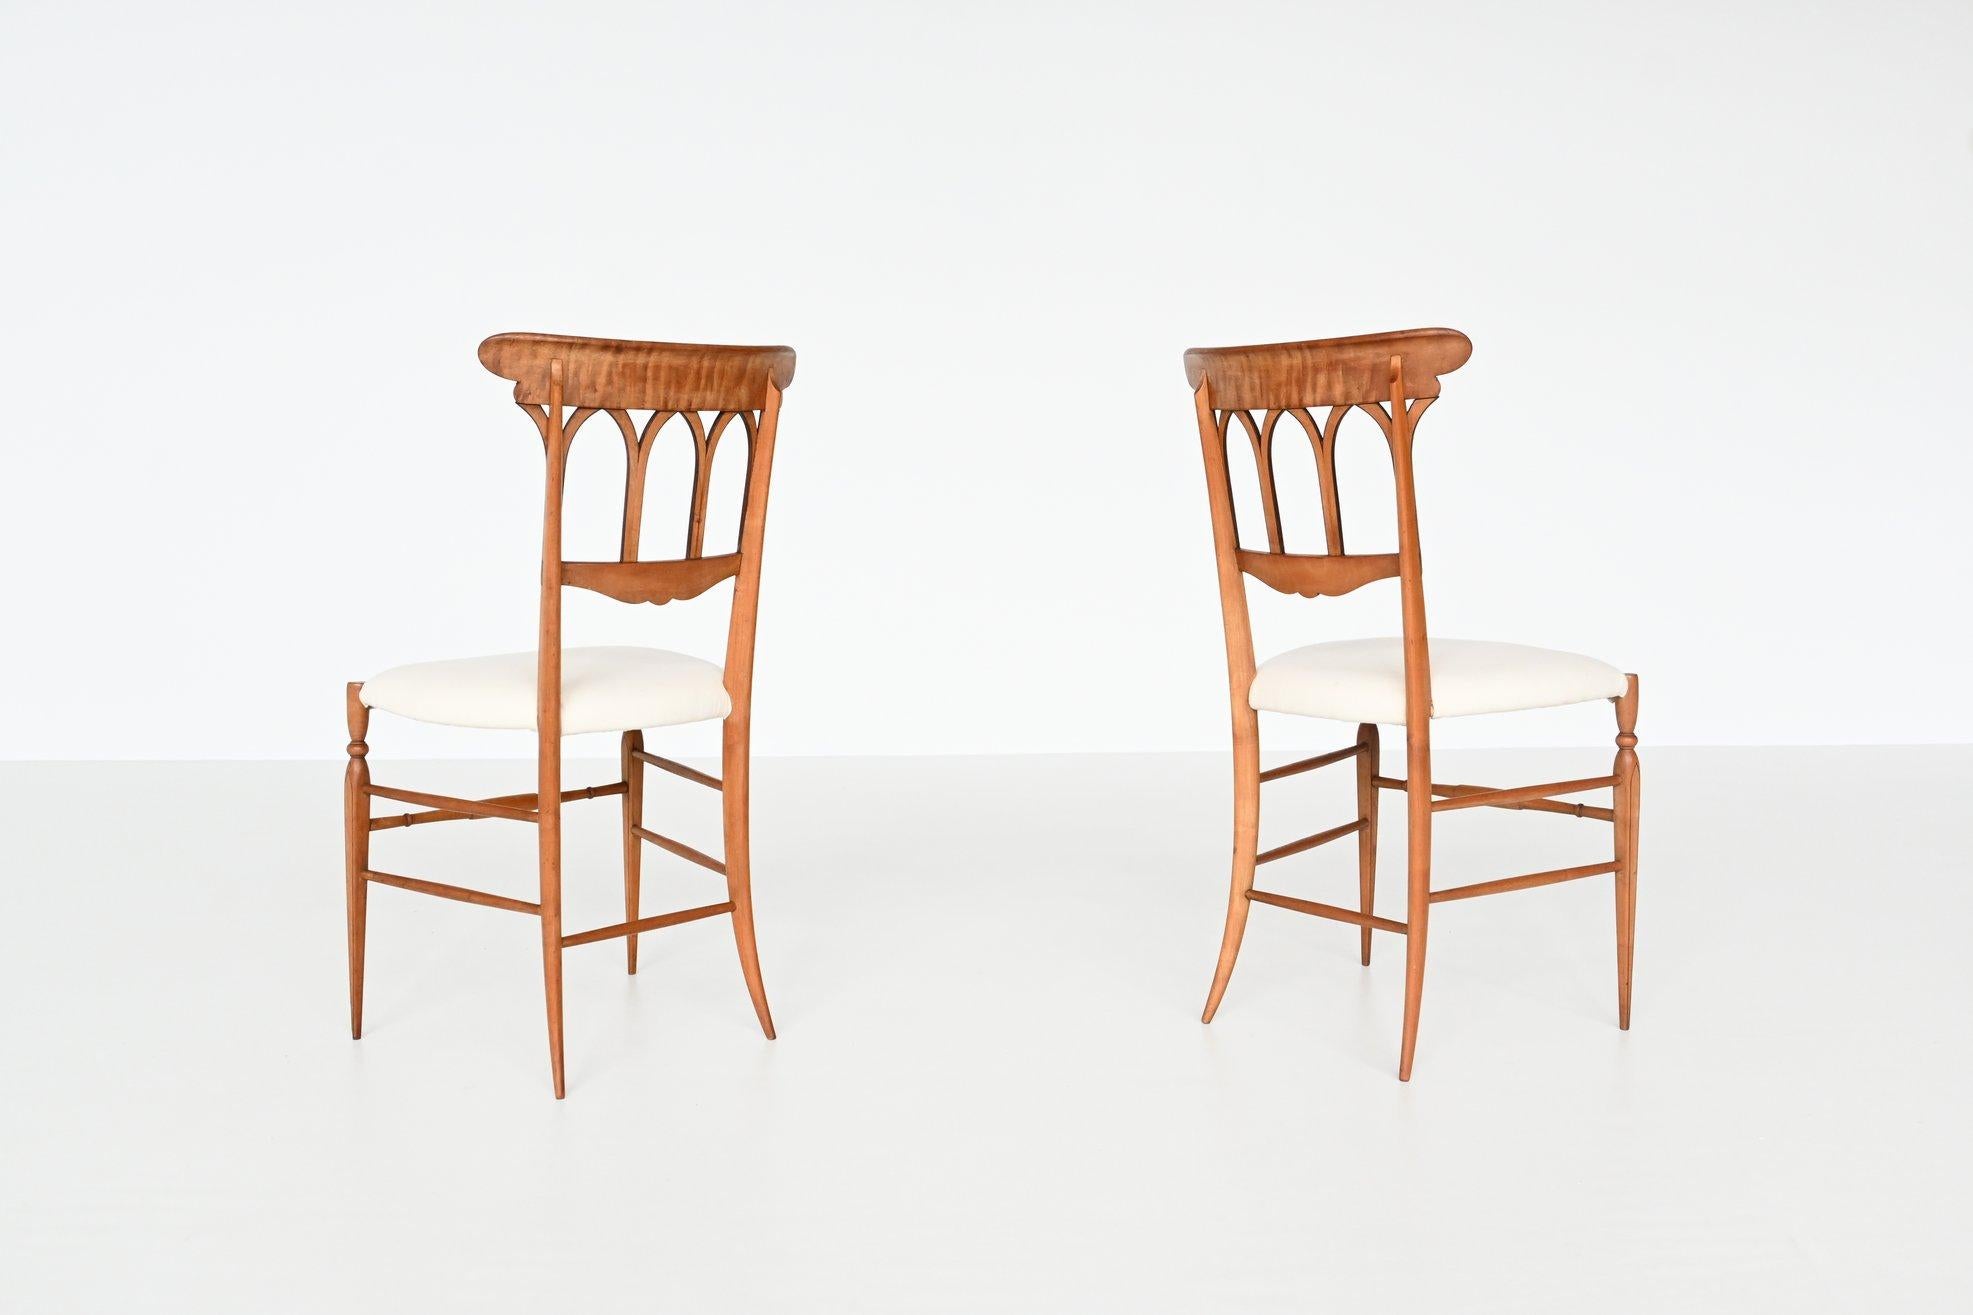 Beautiful pair of elegant Italian chairs by Chiavari, Italy, 1950. Fantastic Italian slim shaped design and amazingly light. These well-crafted chairs have a beech wooden frame and are newly upholstered with white fabric of Kvadrat. They have very